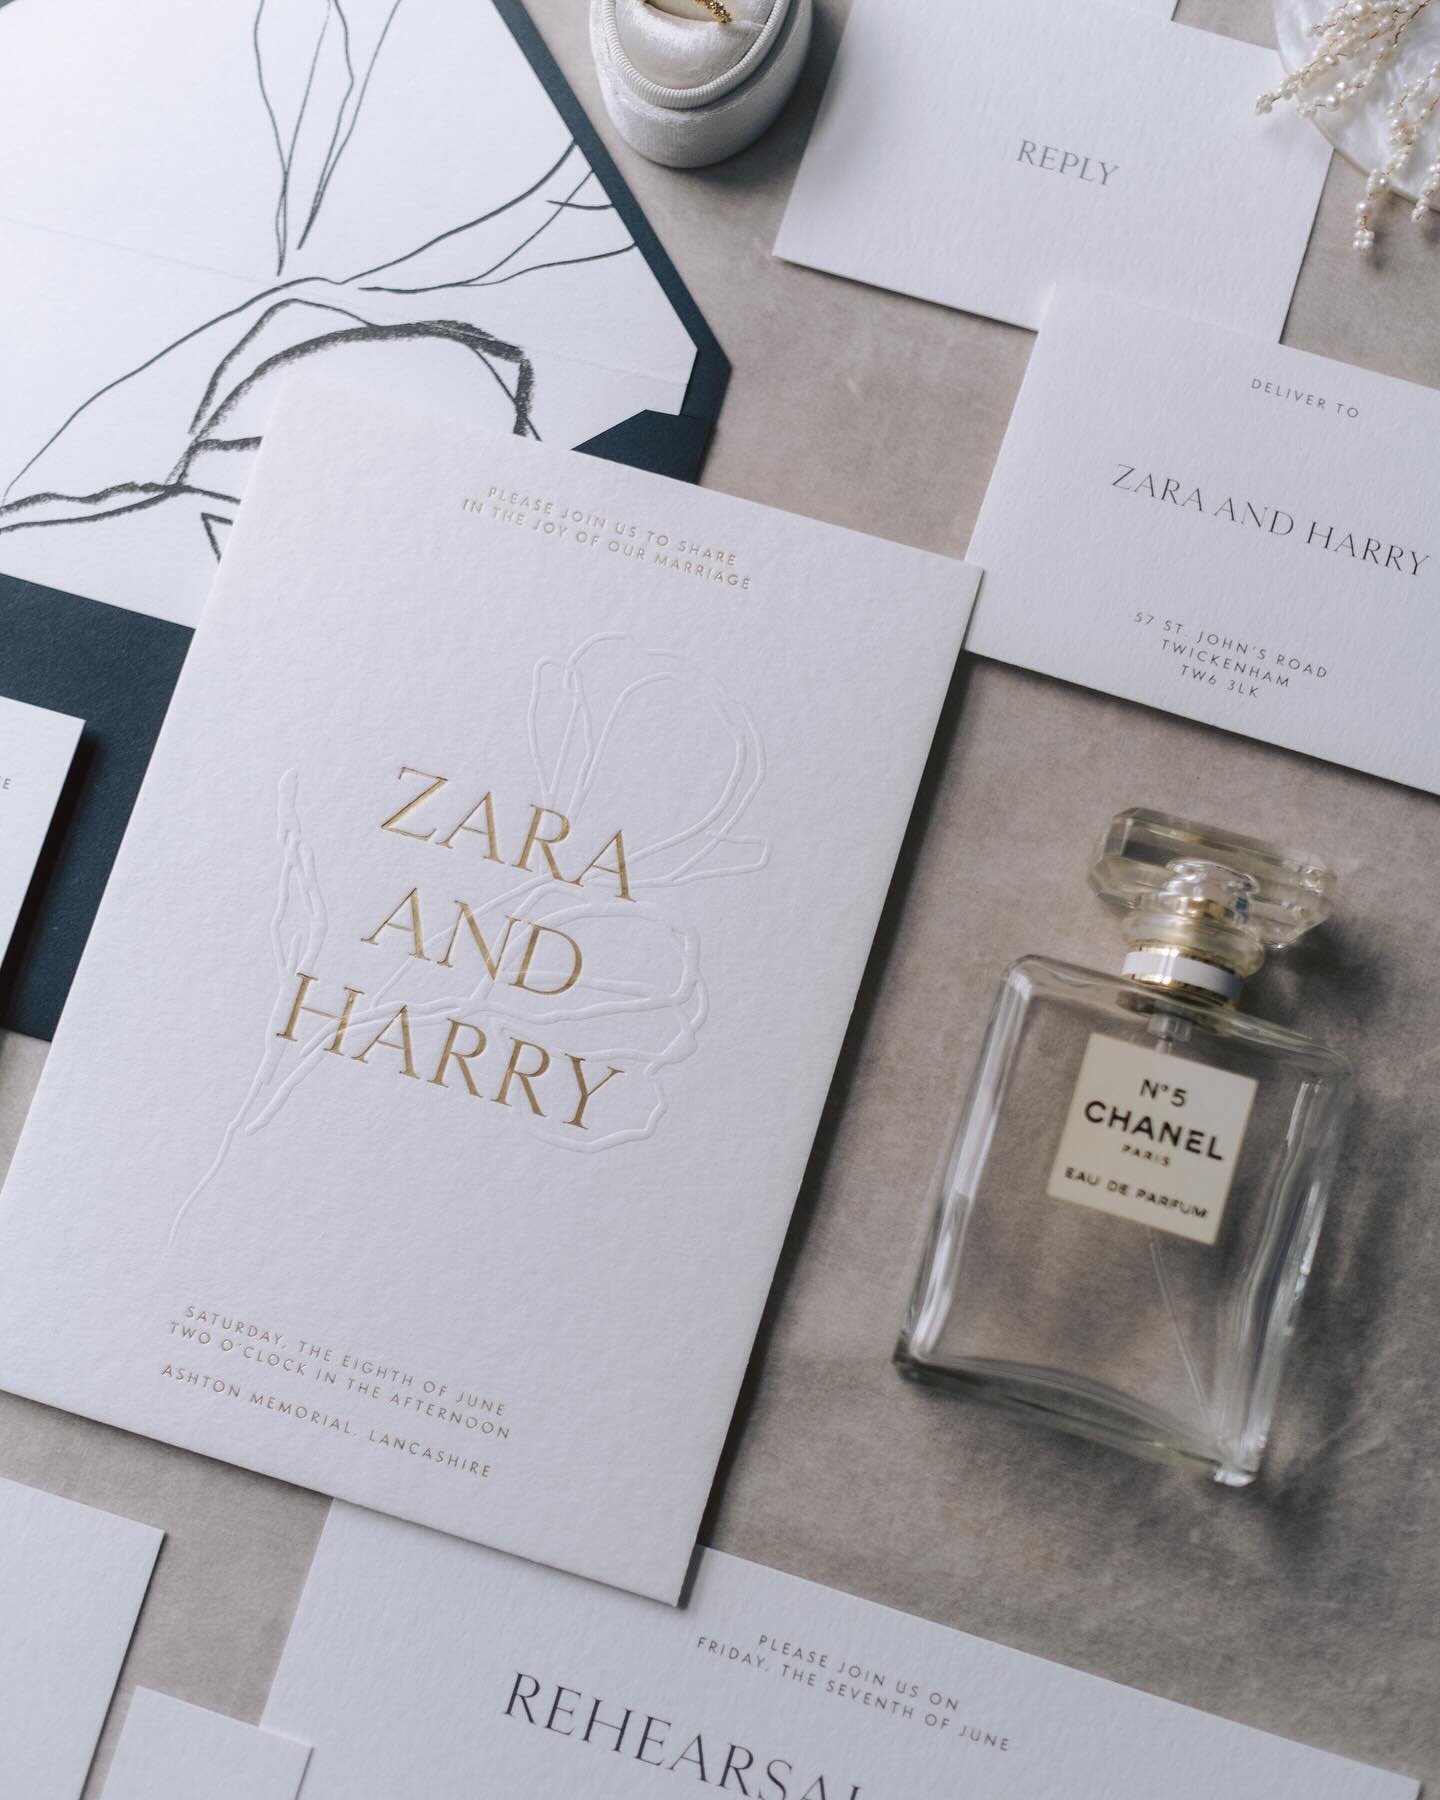 Beautifully detailed stationery by @bureaudesign for Z&amp;H expertly photographed by @emmapilkingtonphotography
.
.
.
#weddingstationery #stationerydesign #embossed #goldfoilstationery #ukweddingstationery